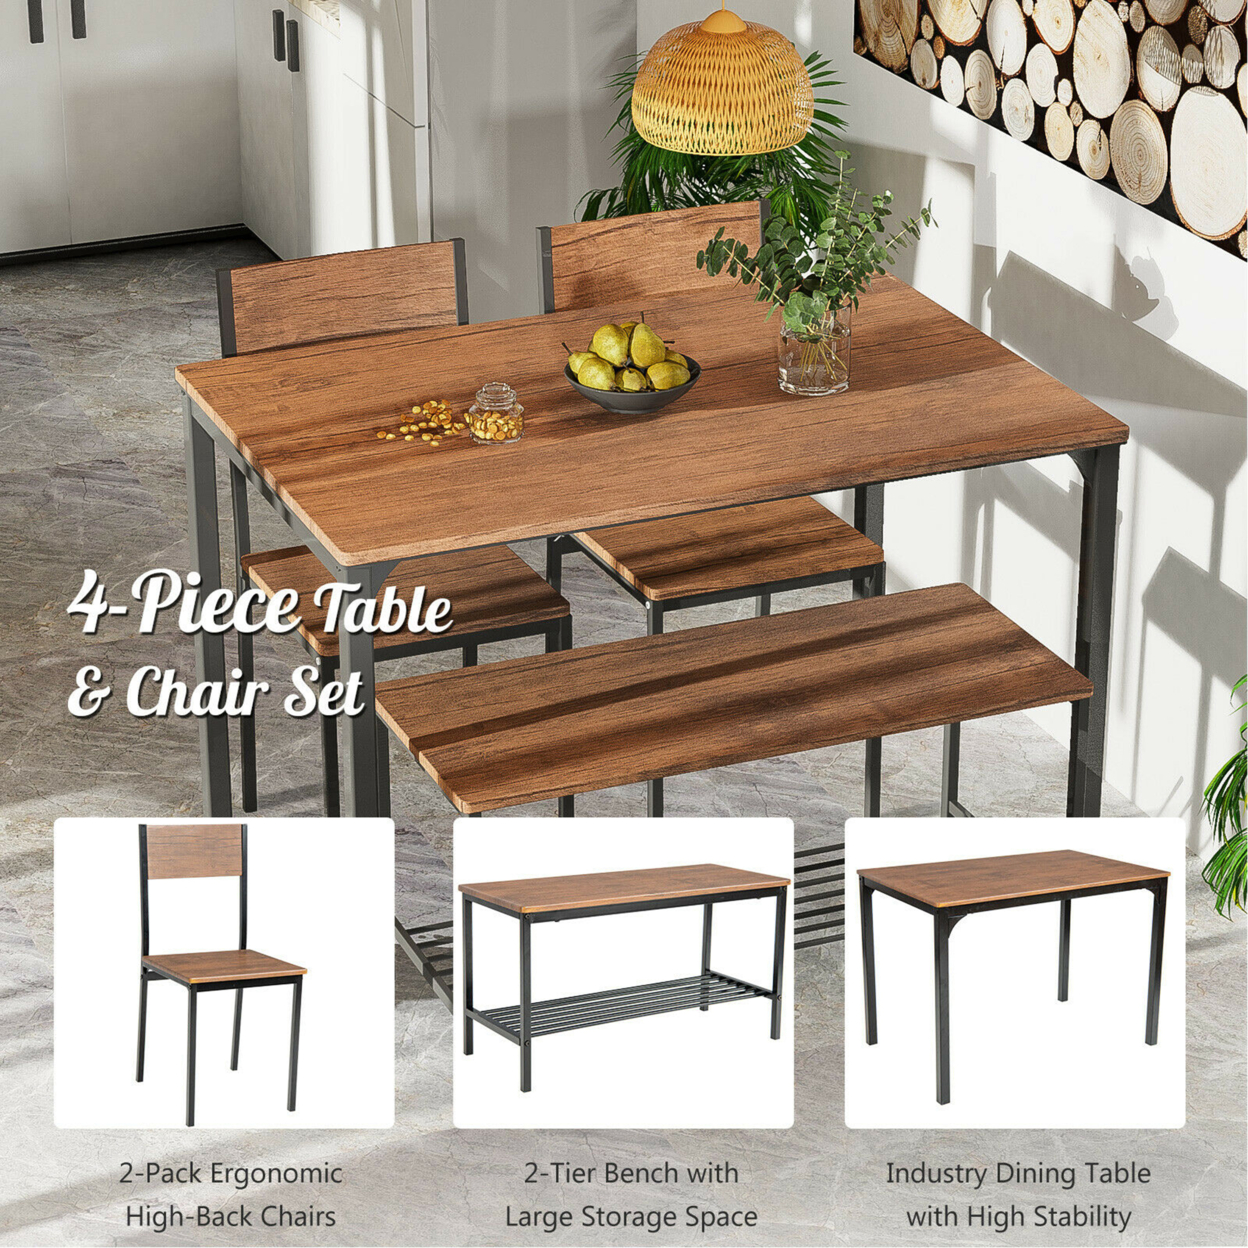 4pcs Dining Table Set Rustic Desk 2 Chairs & Bench W/ Storage Rack - Grey